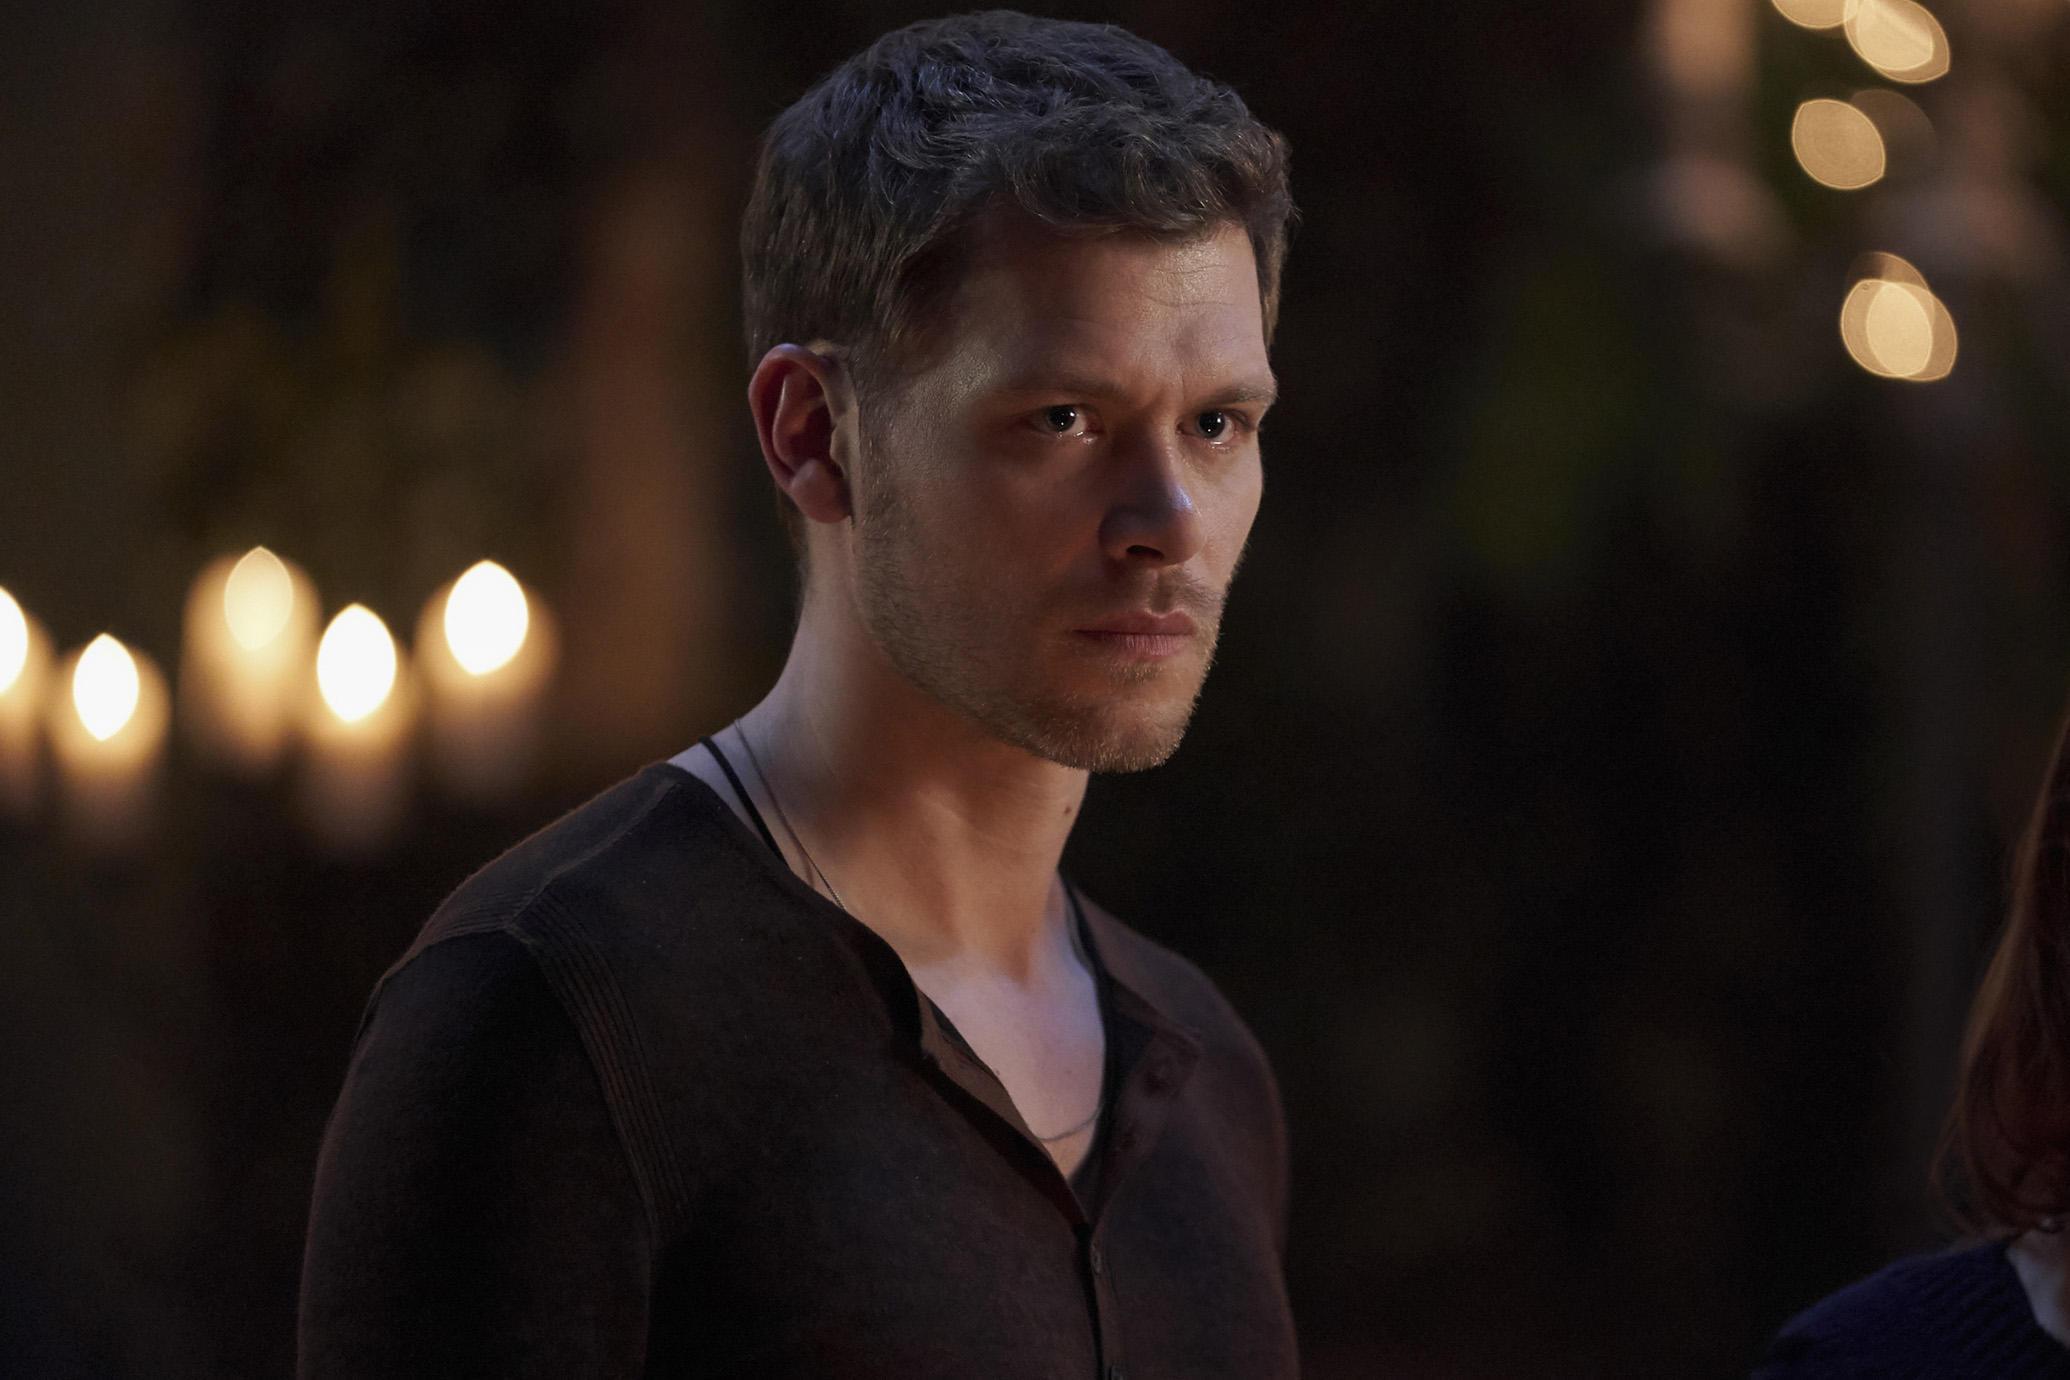 Best Klaus Mikaelson GIFs from The Vampire Diaries and